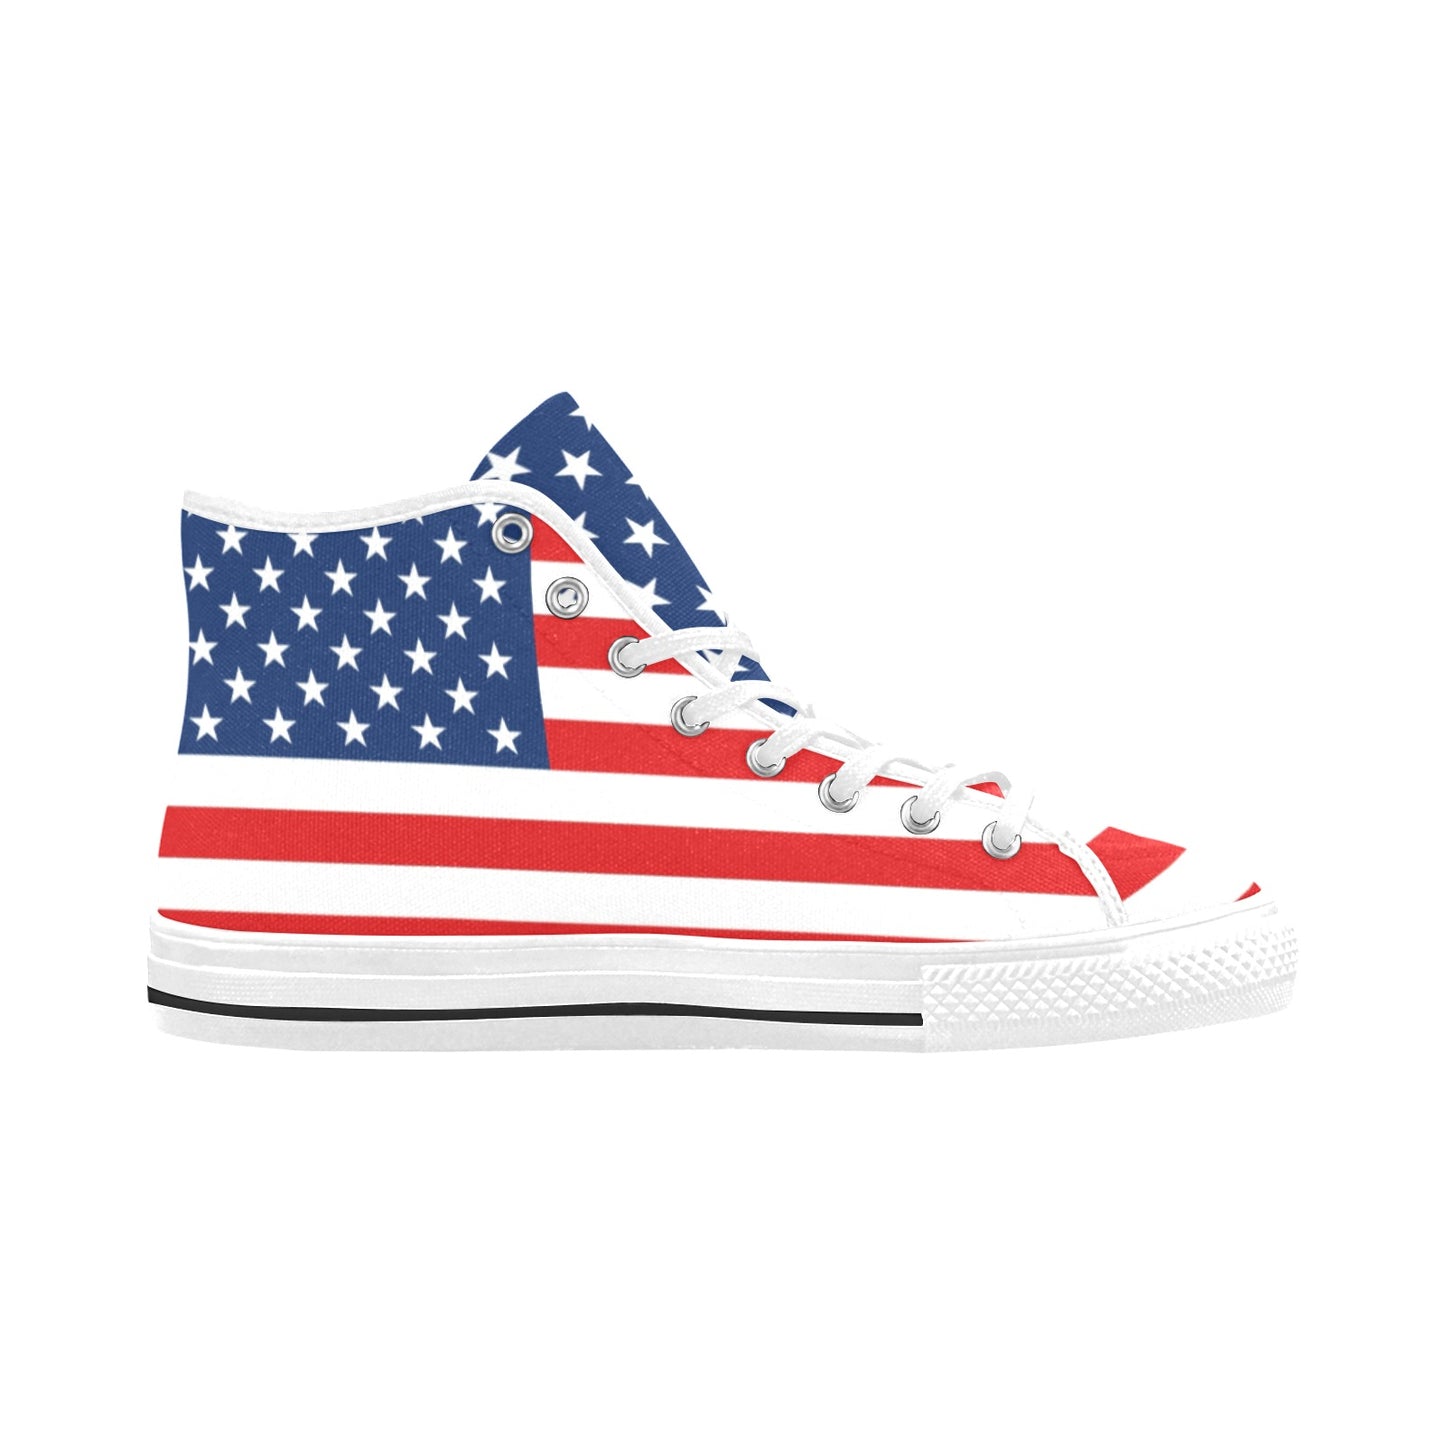 American Flag Women High Top Shoes, USA Red White Blue Stars Stripes 4th July Lace Up Sneakers Footwear Canvas Streetwear Girls Designer Active Starcove Fashion